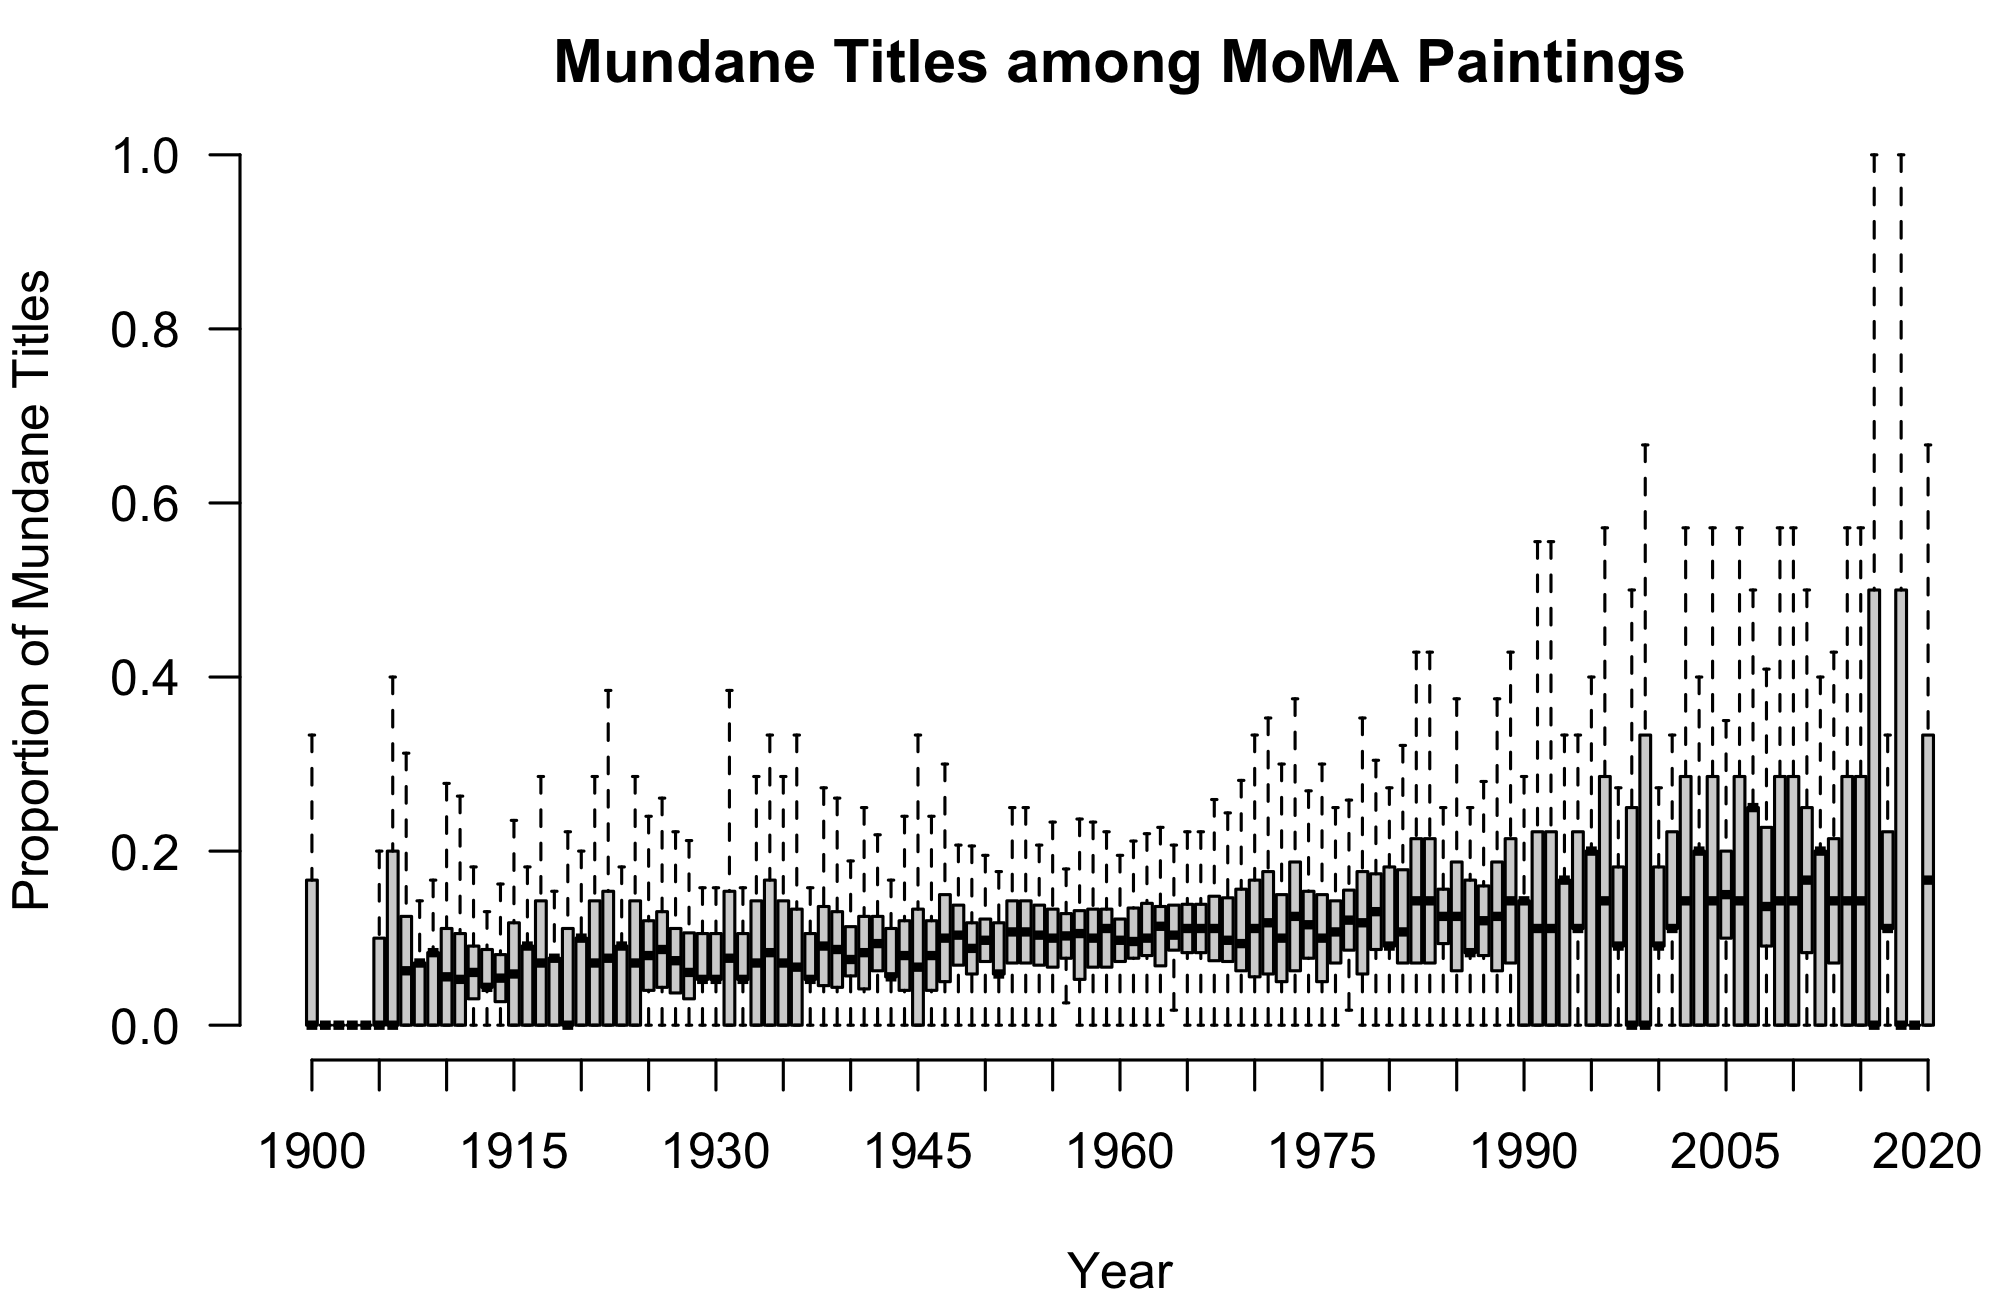 Time-series plot of prevalence of mundane titles among paintings in the MoMA database.